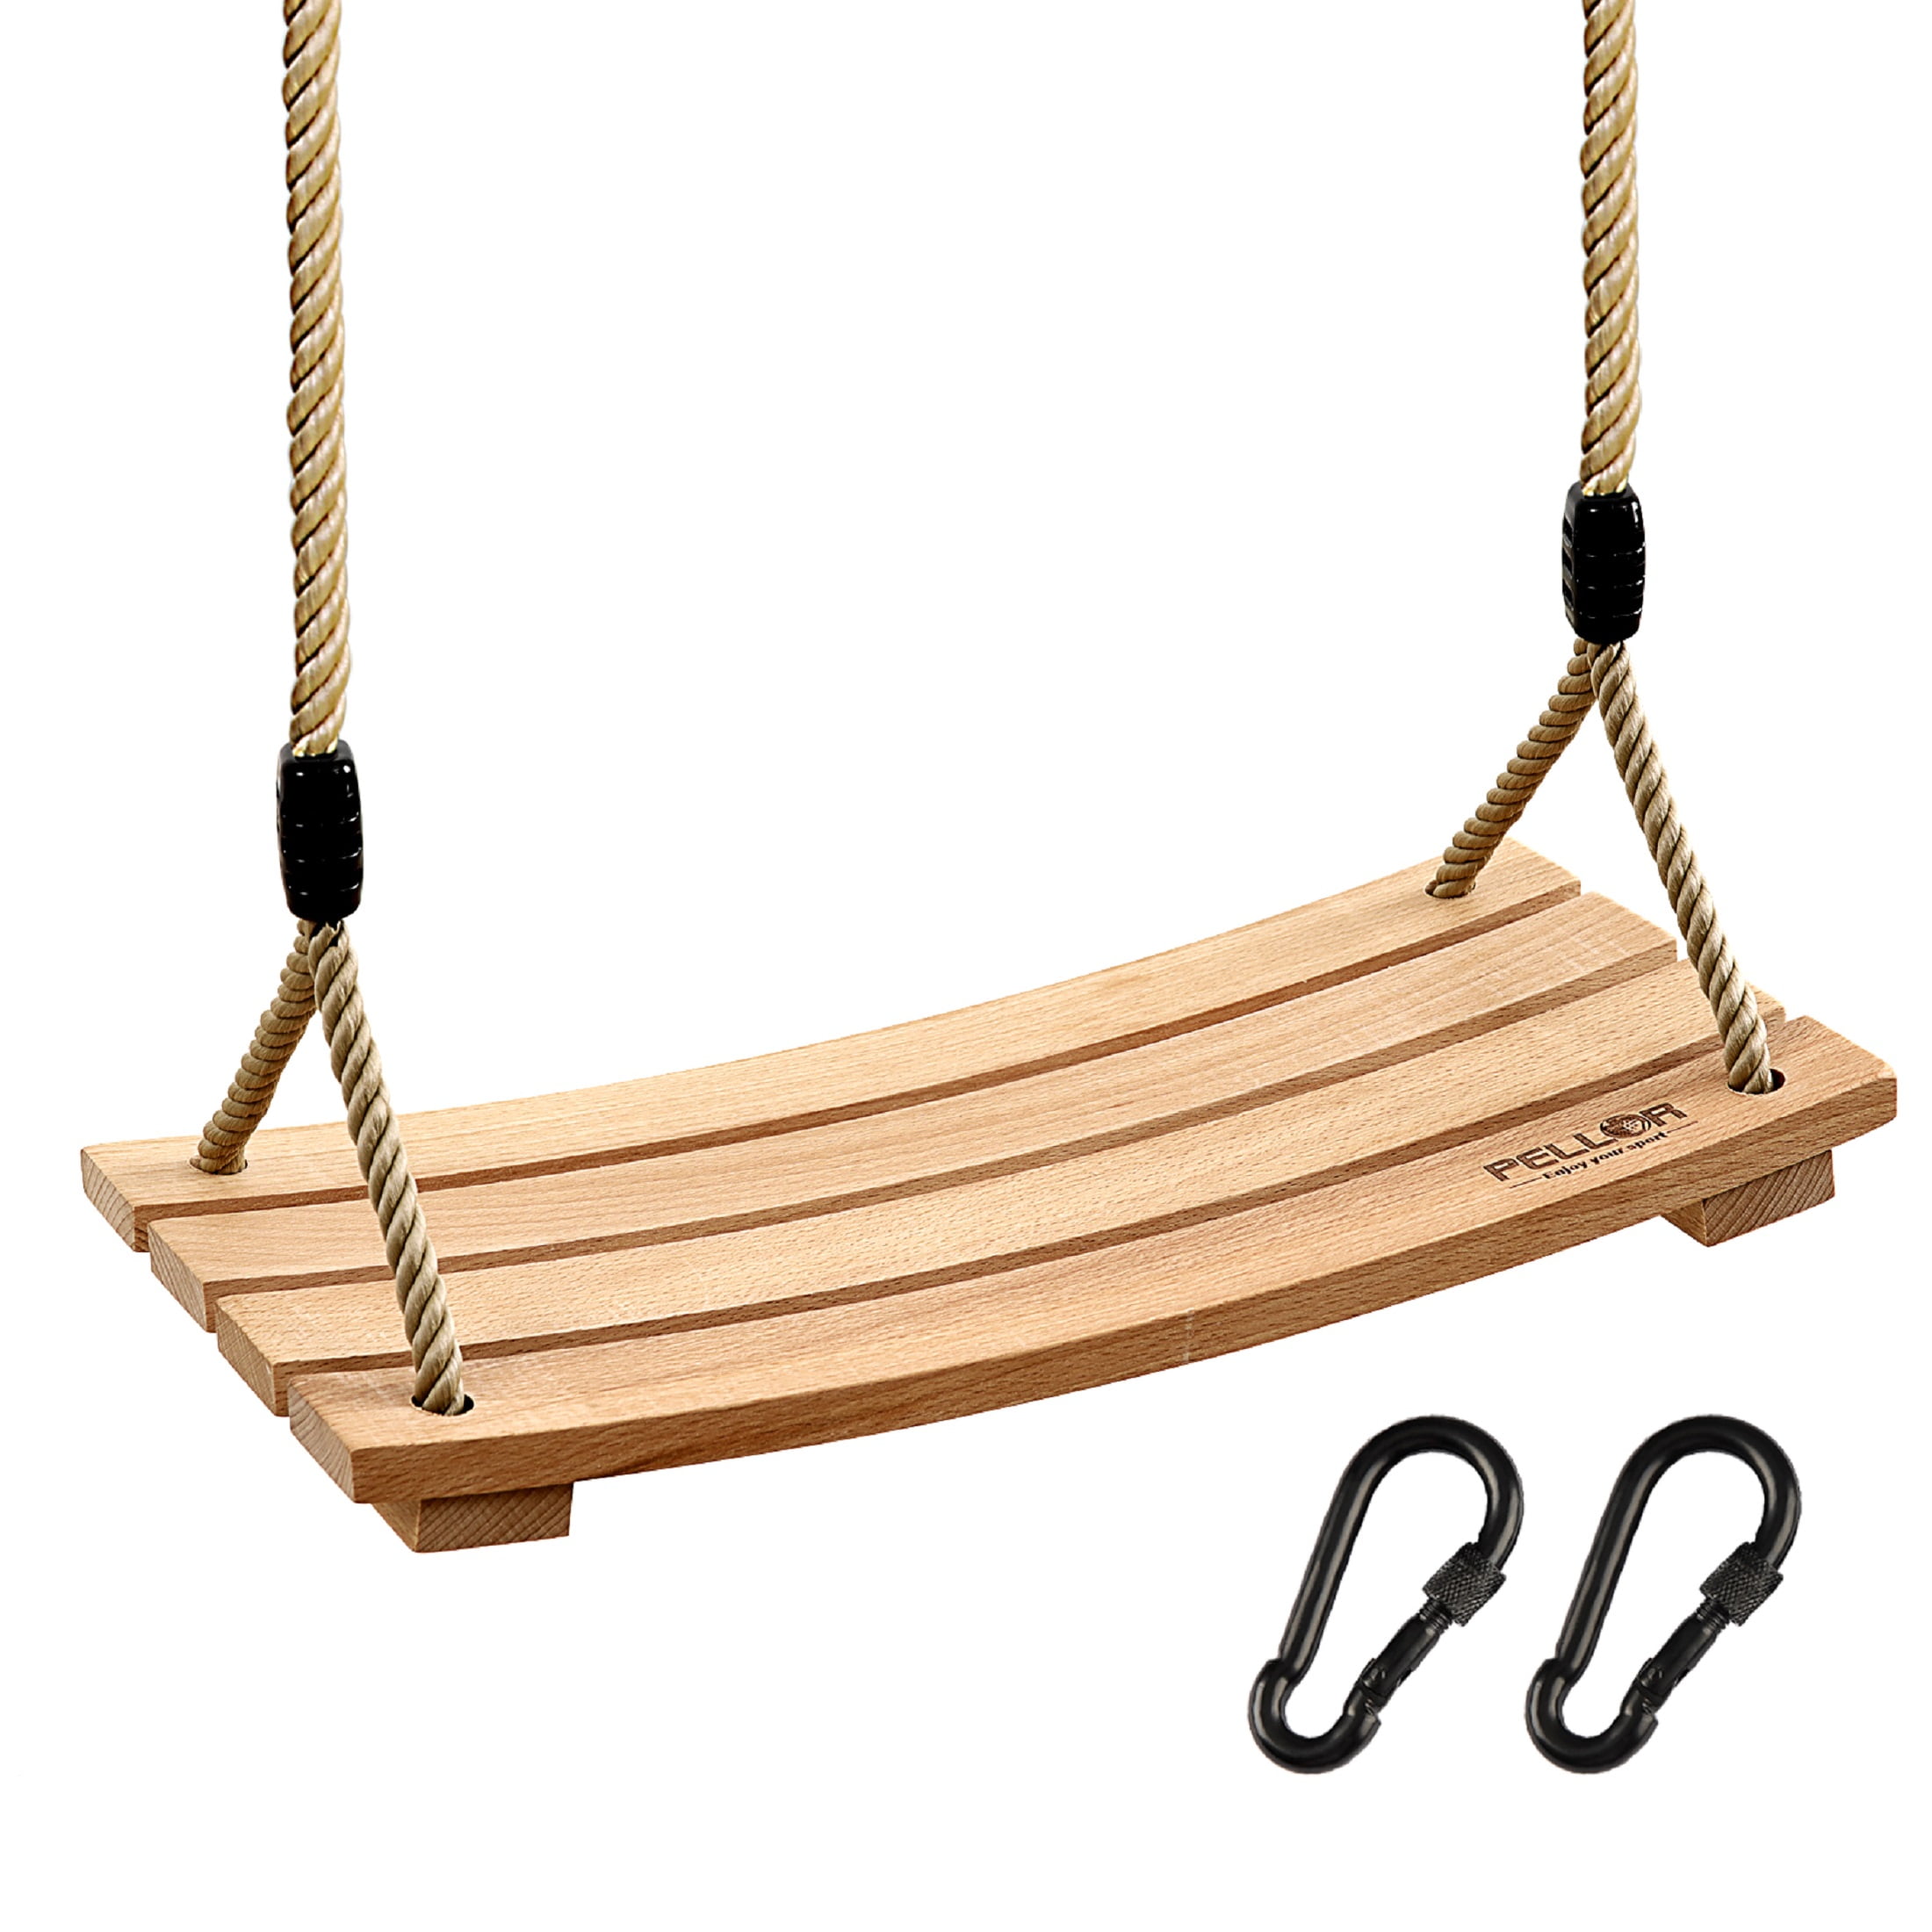 Fully Assembled Swingan Cool Disc Swing With Adjustable Rope 